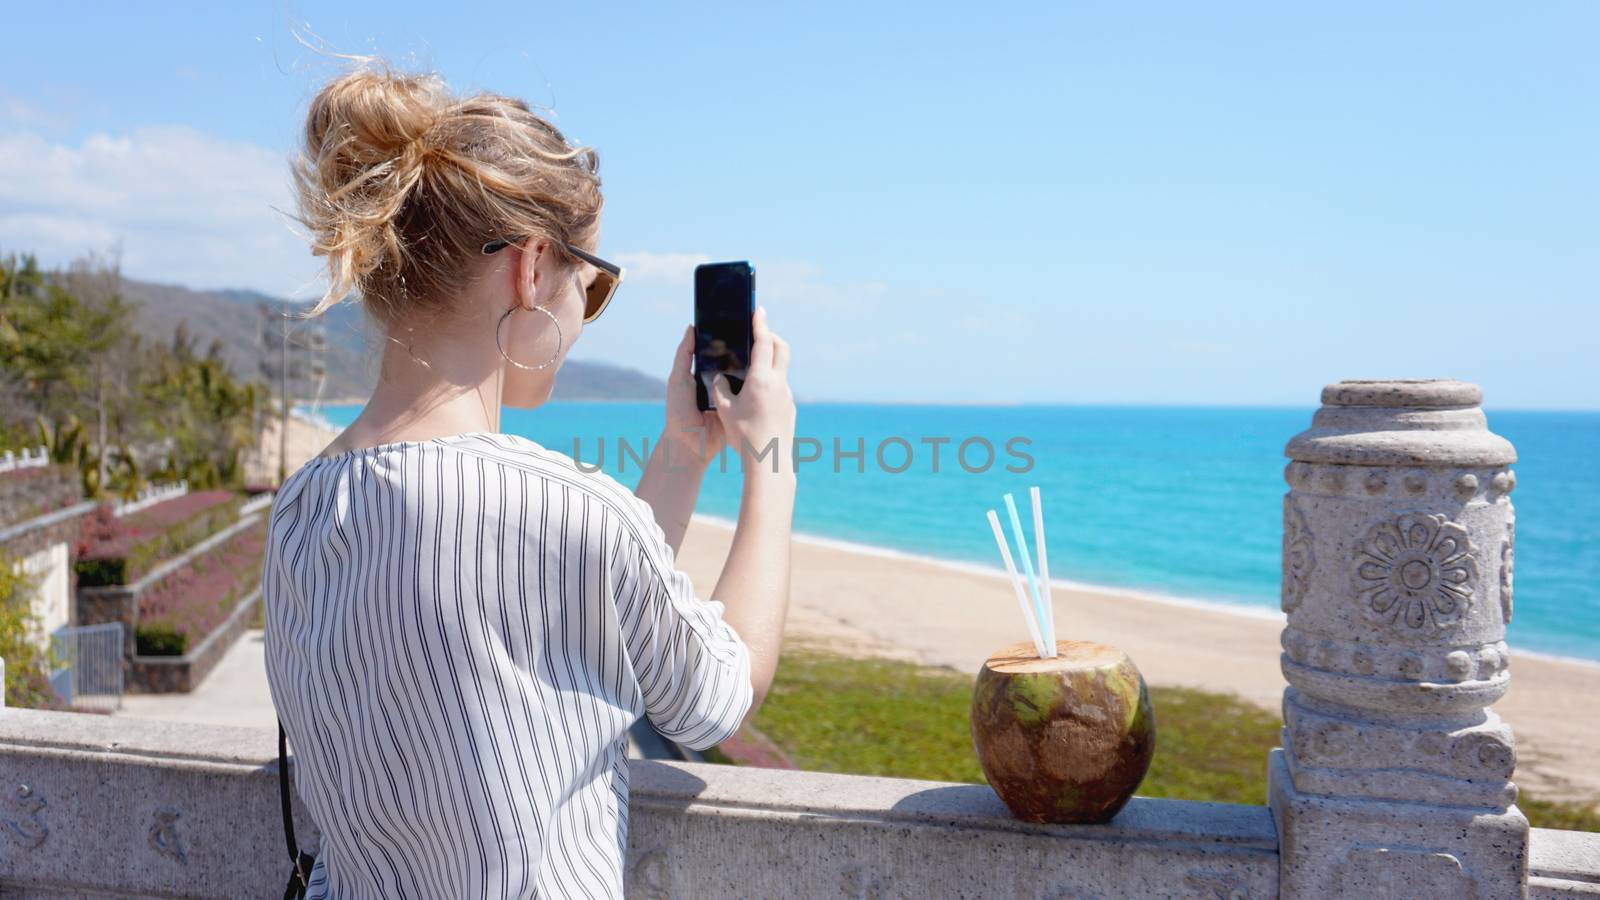 A beautiful young woman on a tropical beach with a phone in her hands. Rest, vacation, resort, beautiful life